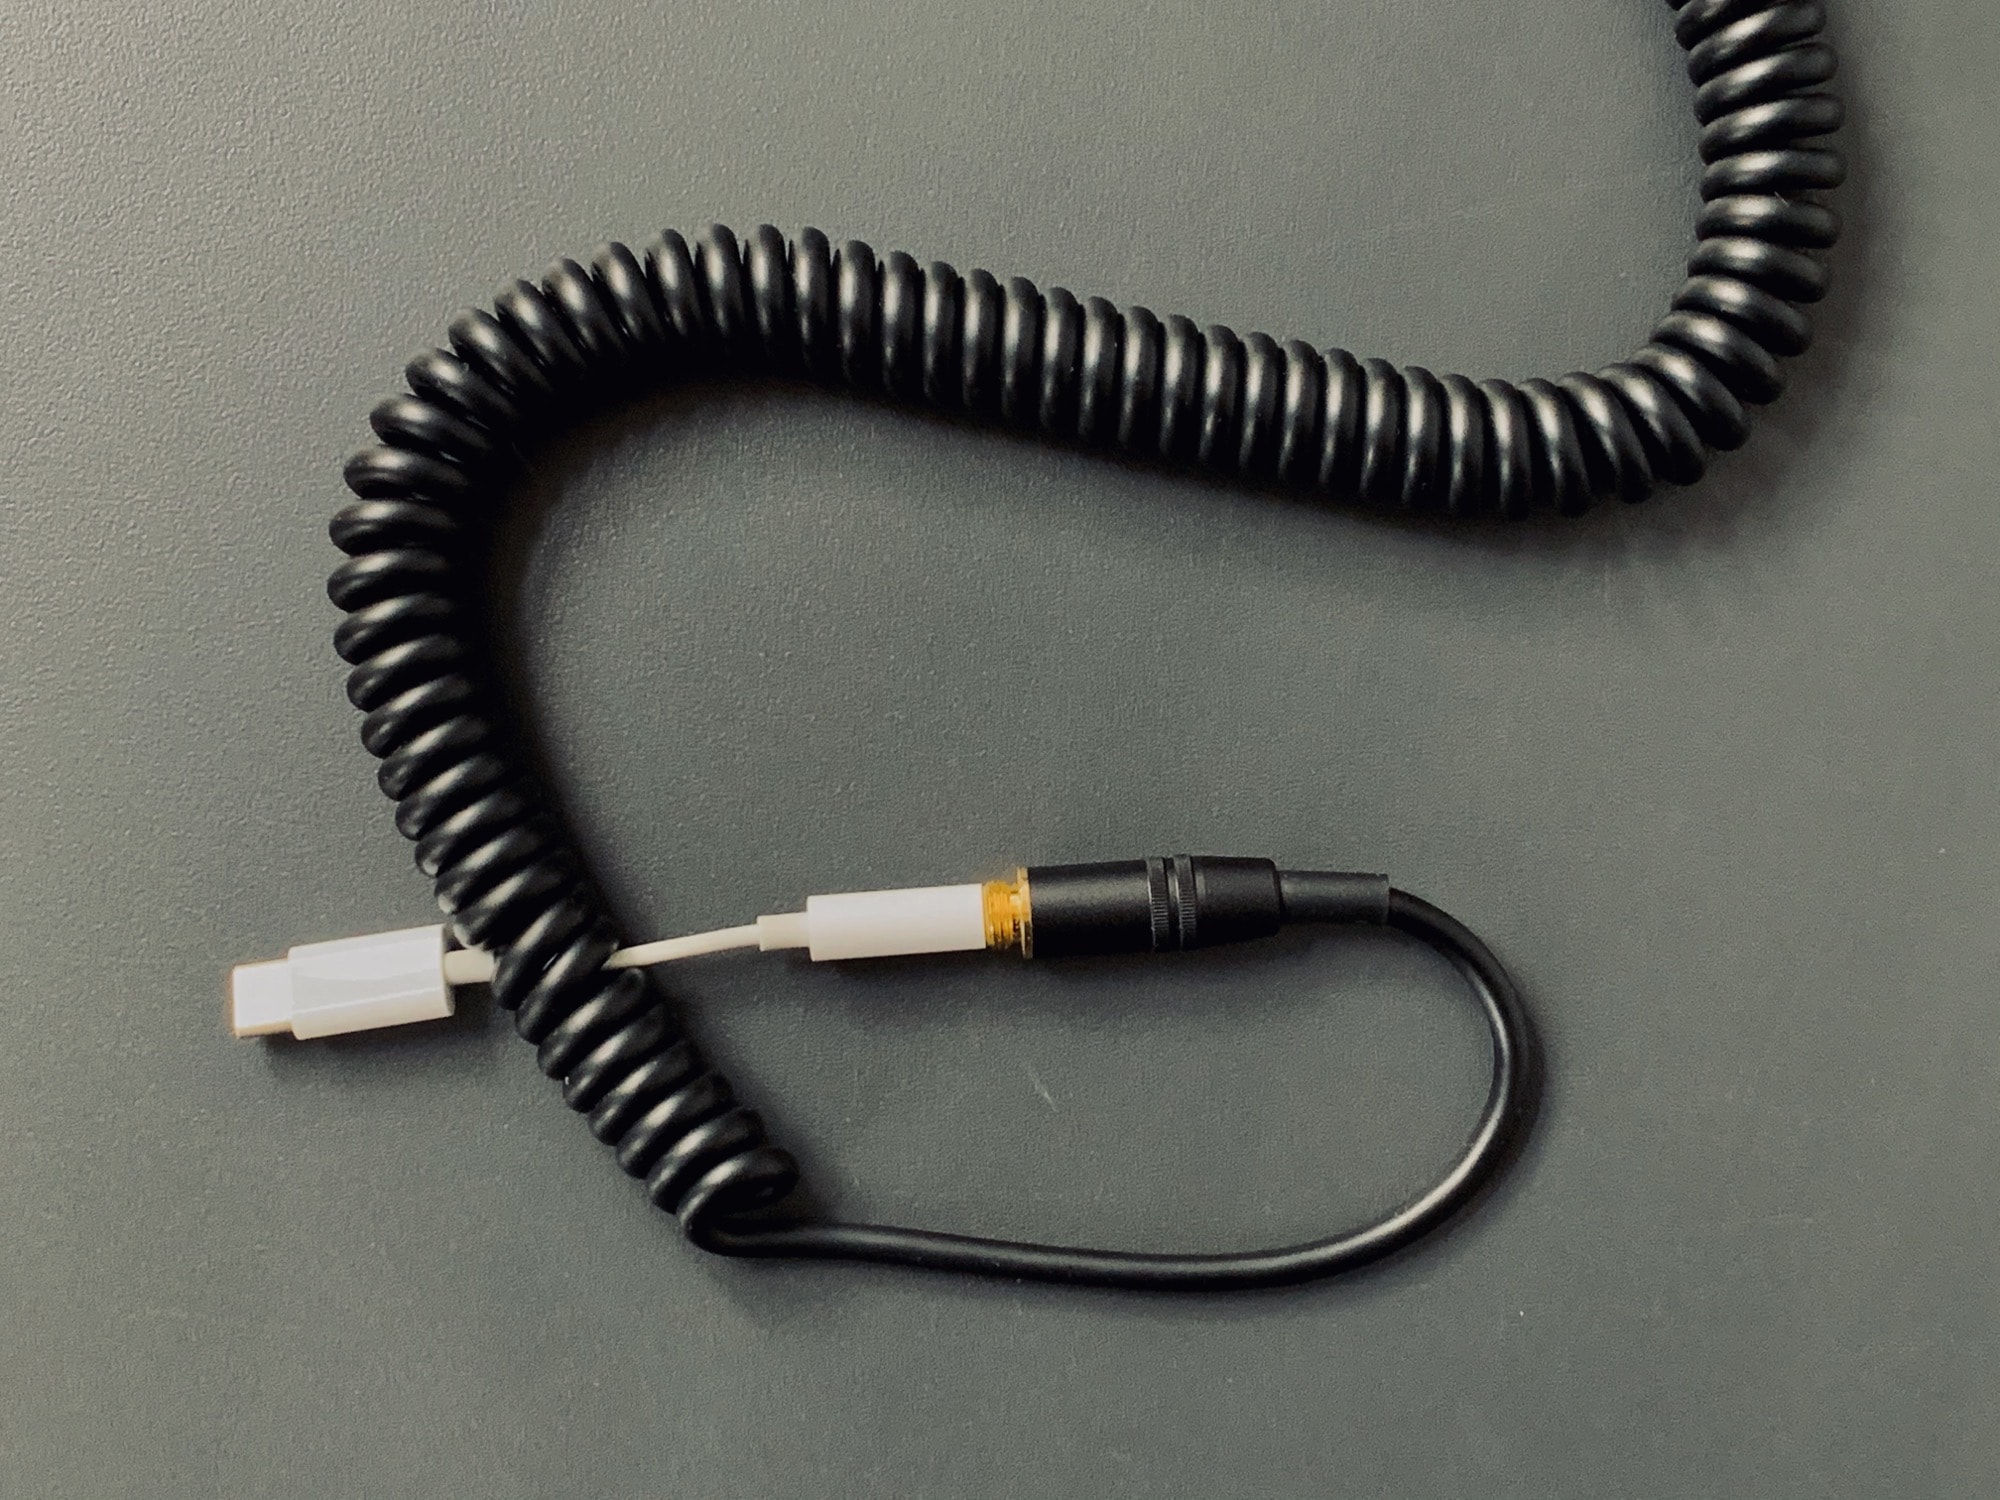 Thanks to the laws of physics, these cables can never become separated. 